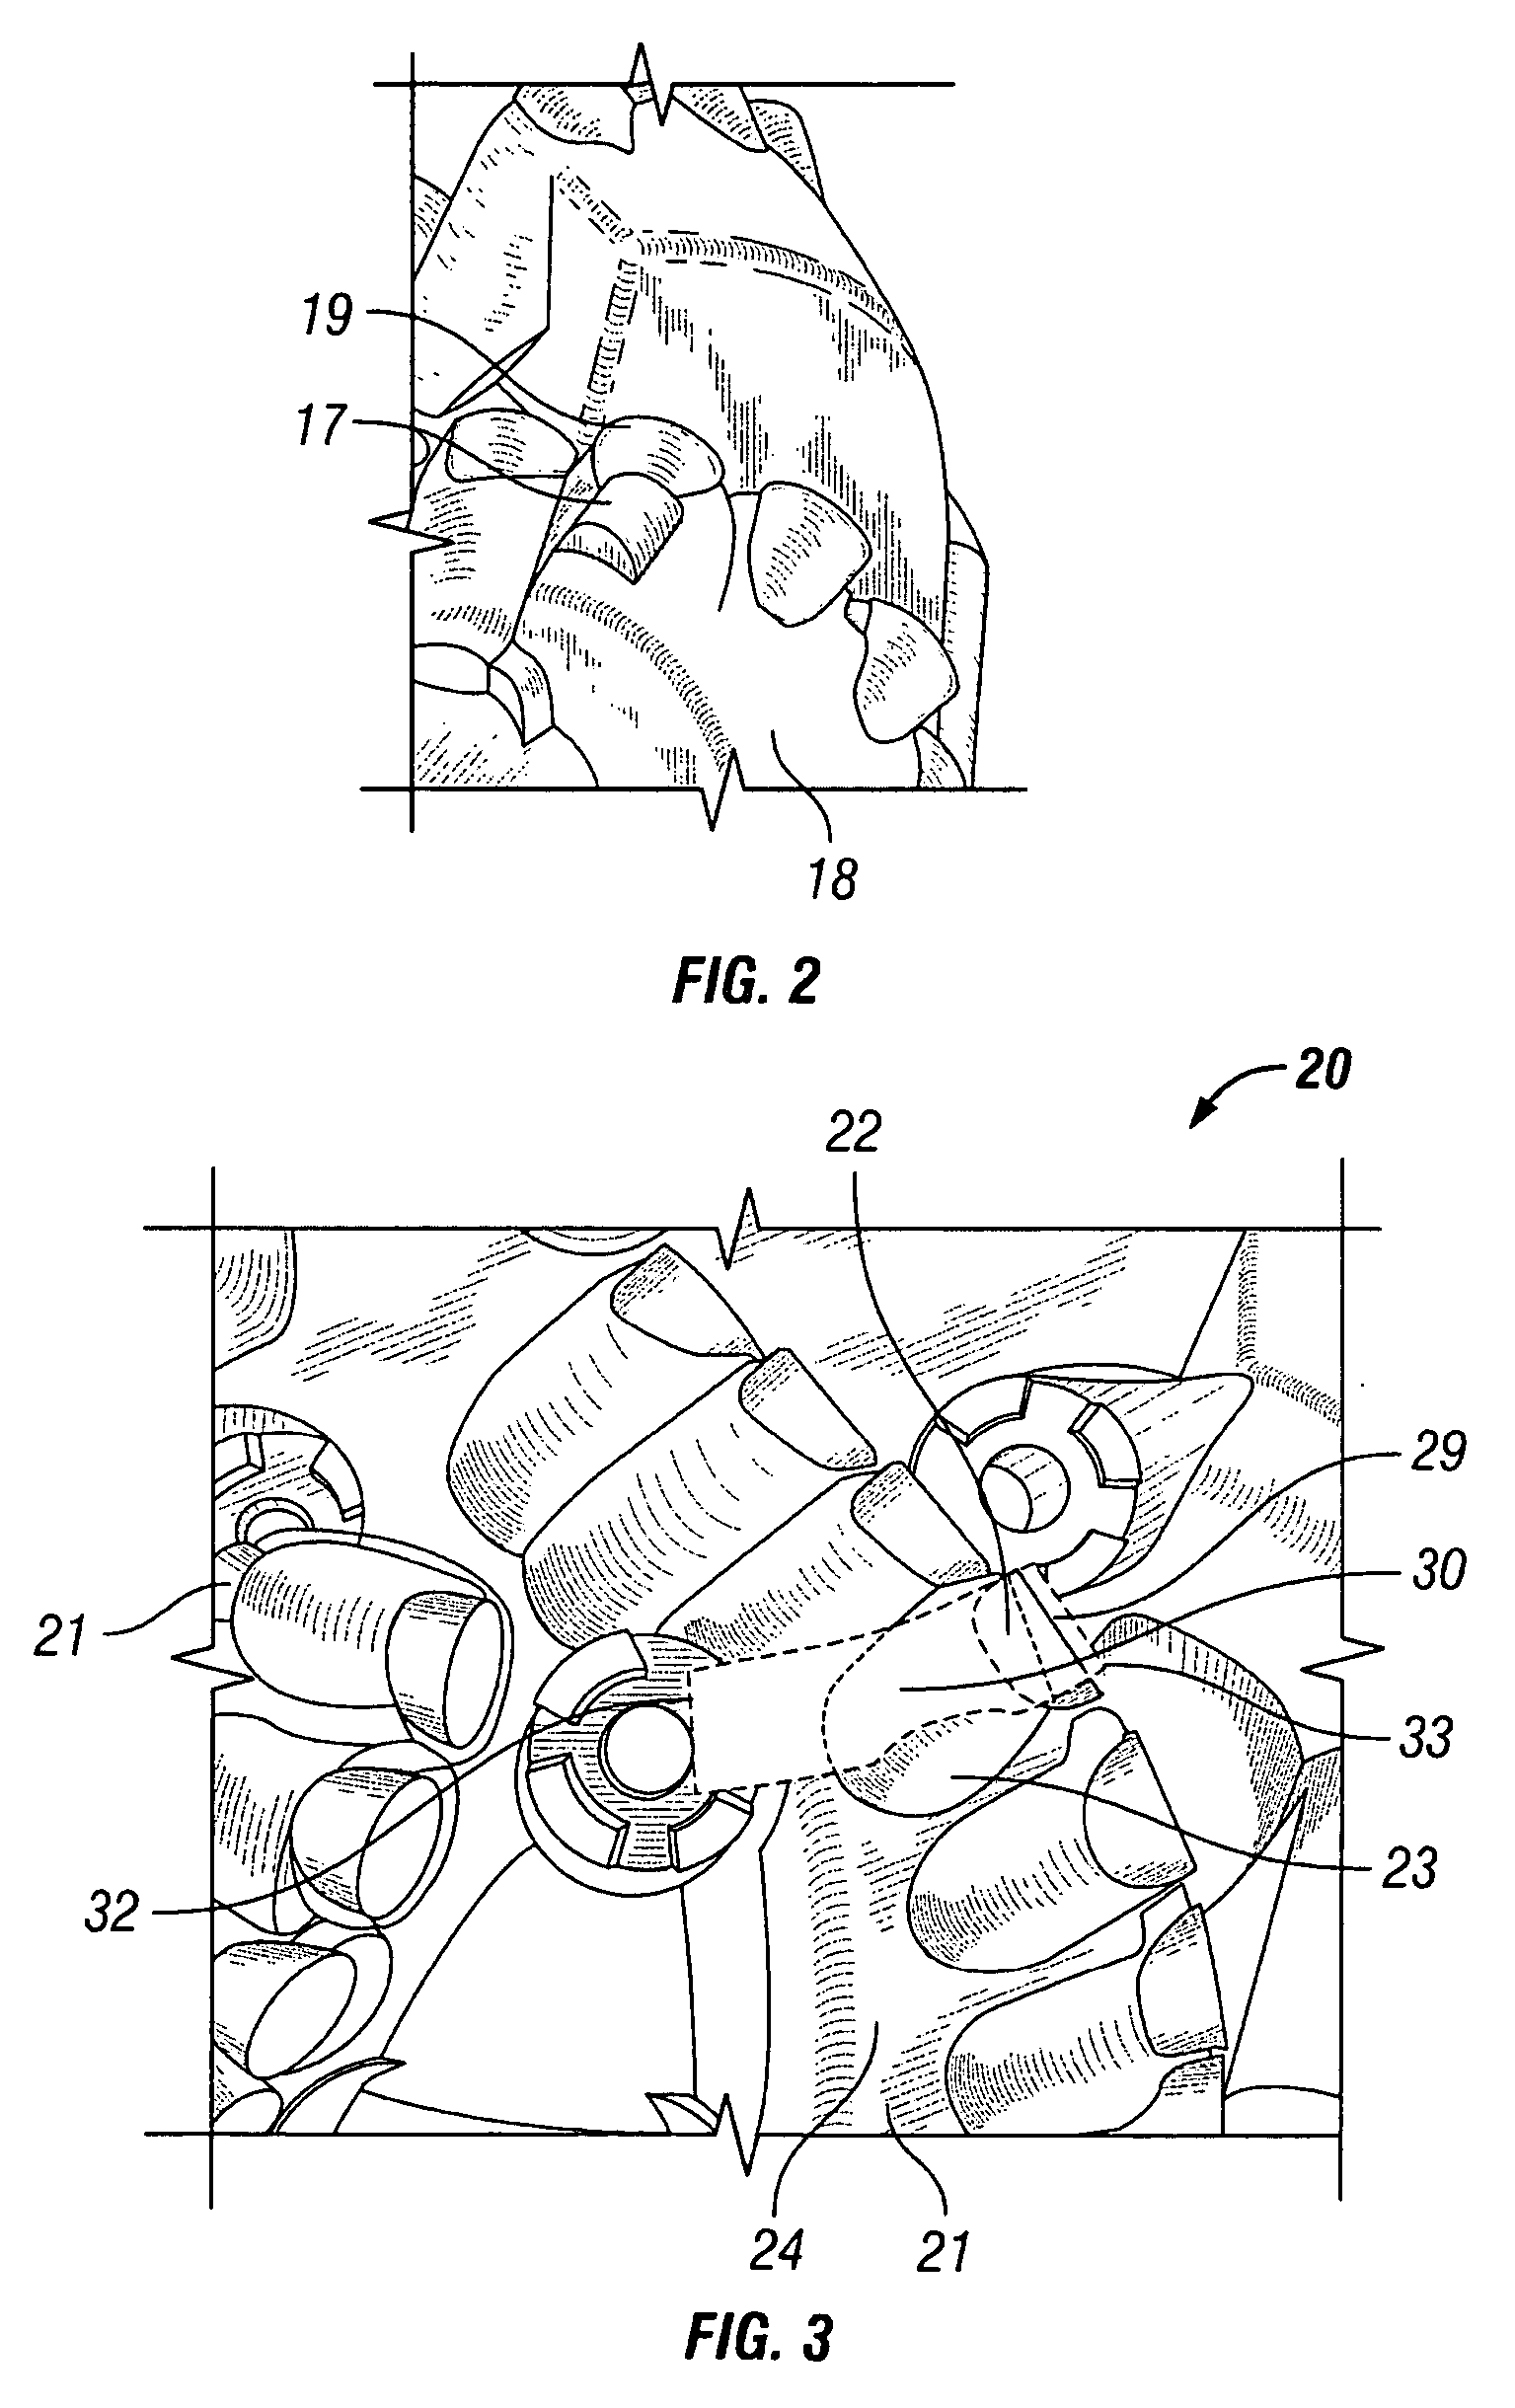 Fixed-head bit with stabilizing features